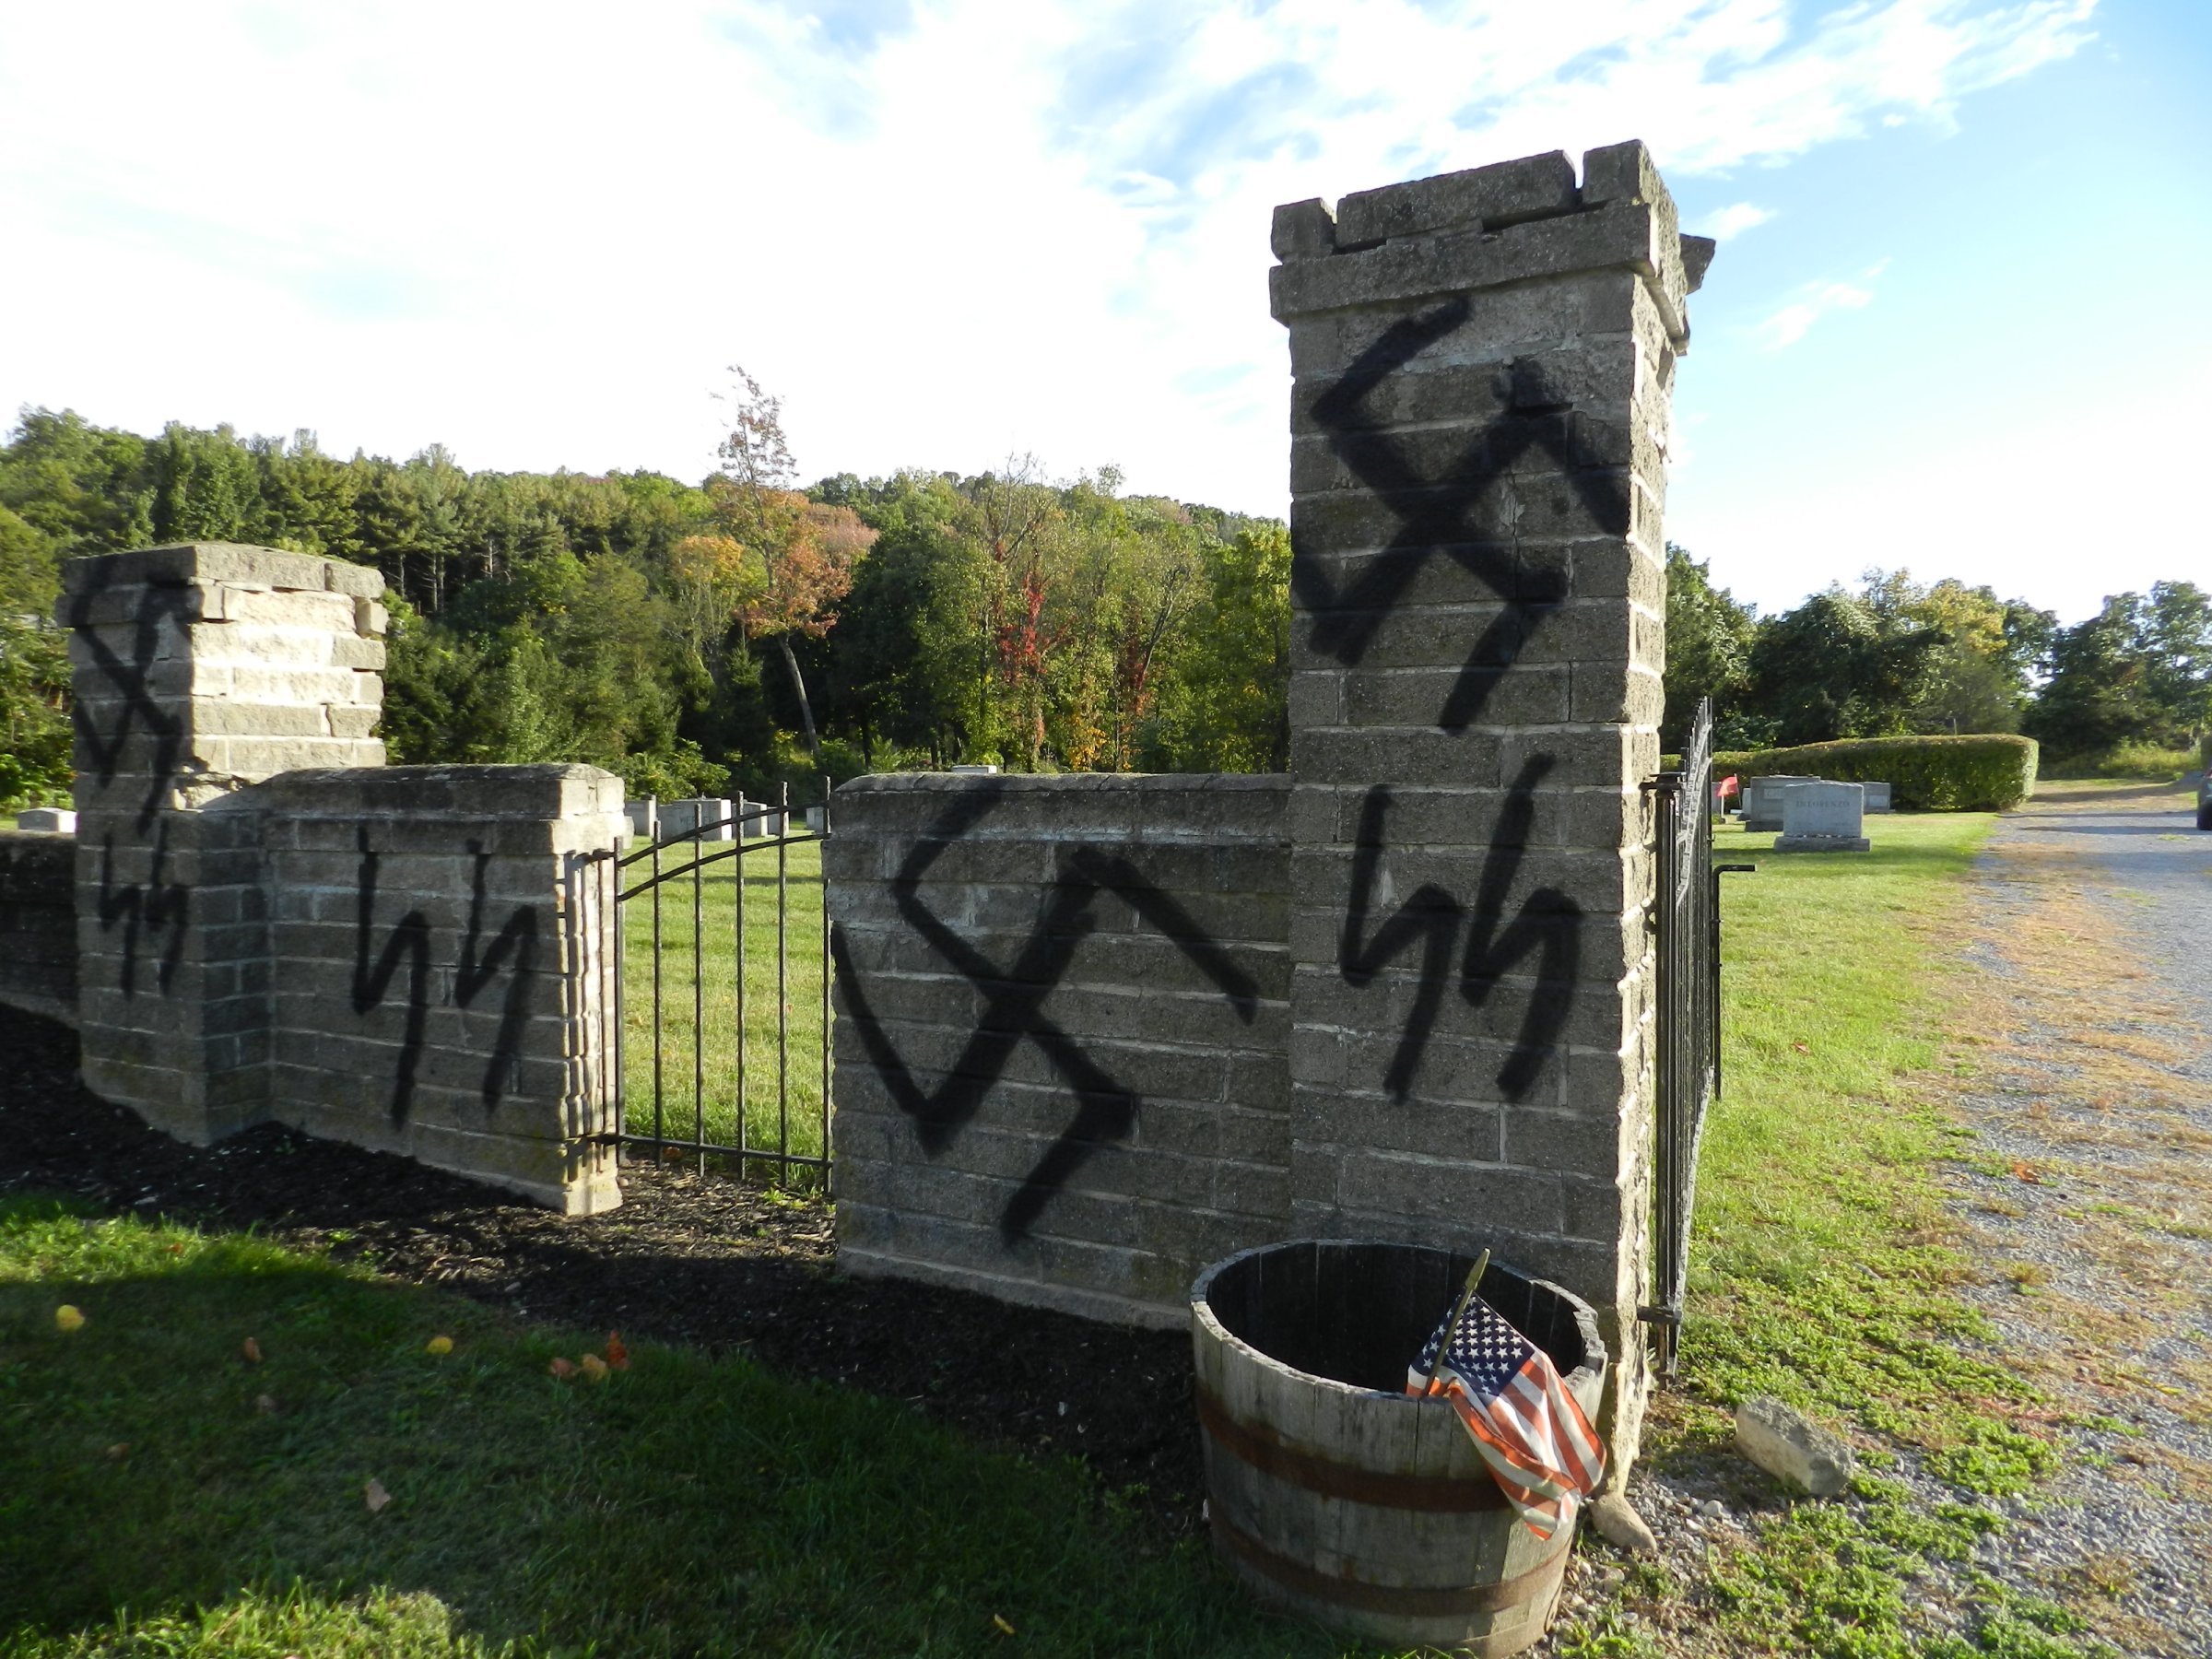 Temple Beth Shalom's cemetery in the Town of Warwick was found desecrated with anti-Semitic graffiti on Oct. 9, 2016.